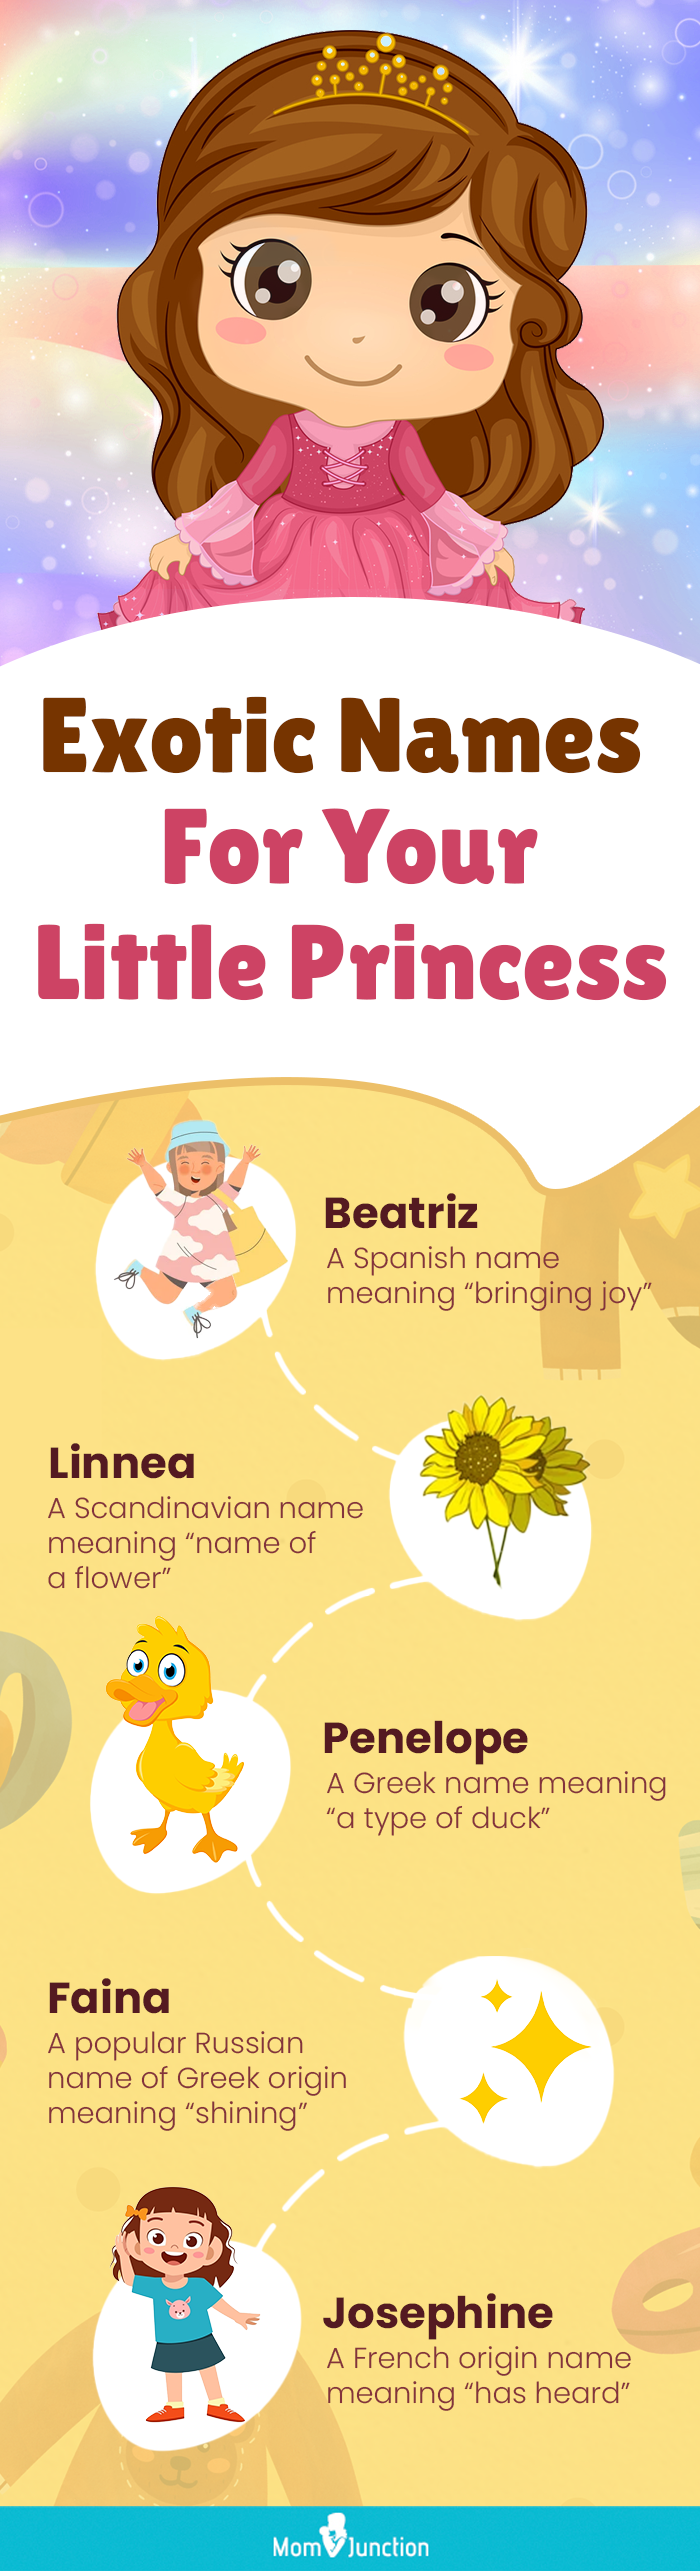 exotic names for your little princess (infographic)